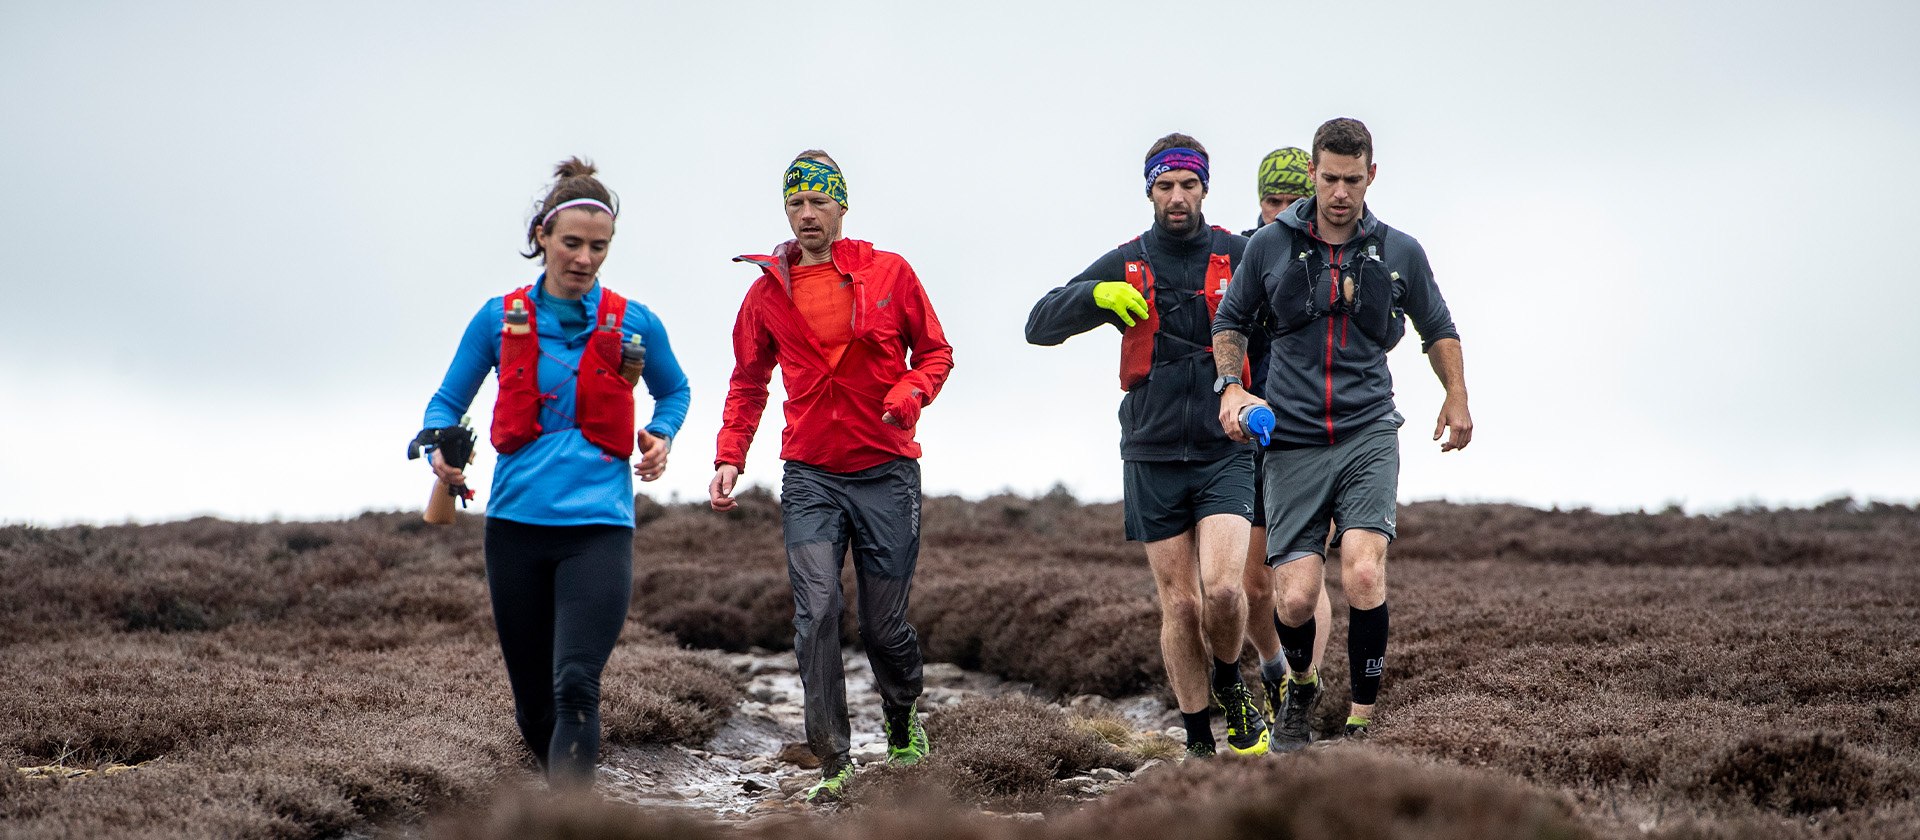 How To Crew For An Ultra Runner- Top 10 Tips